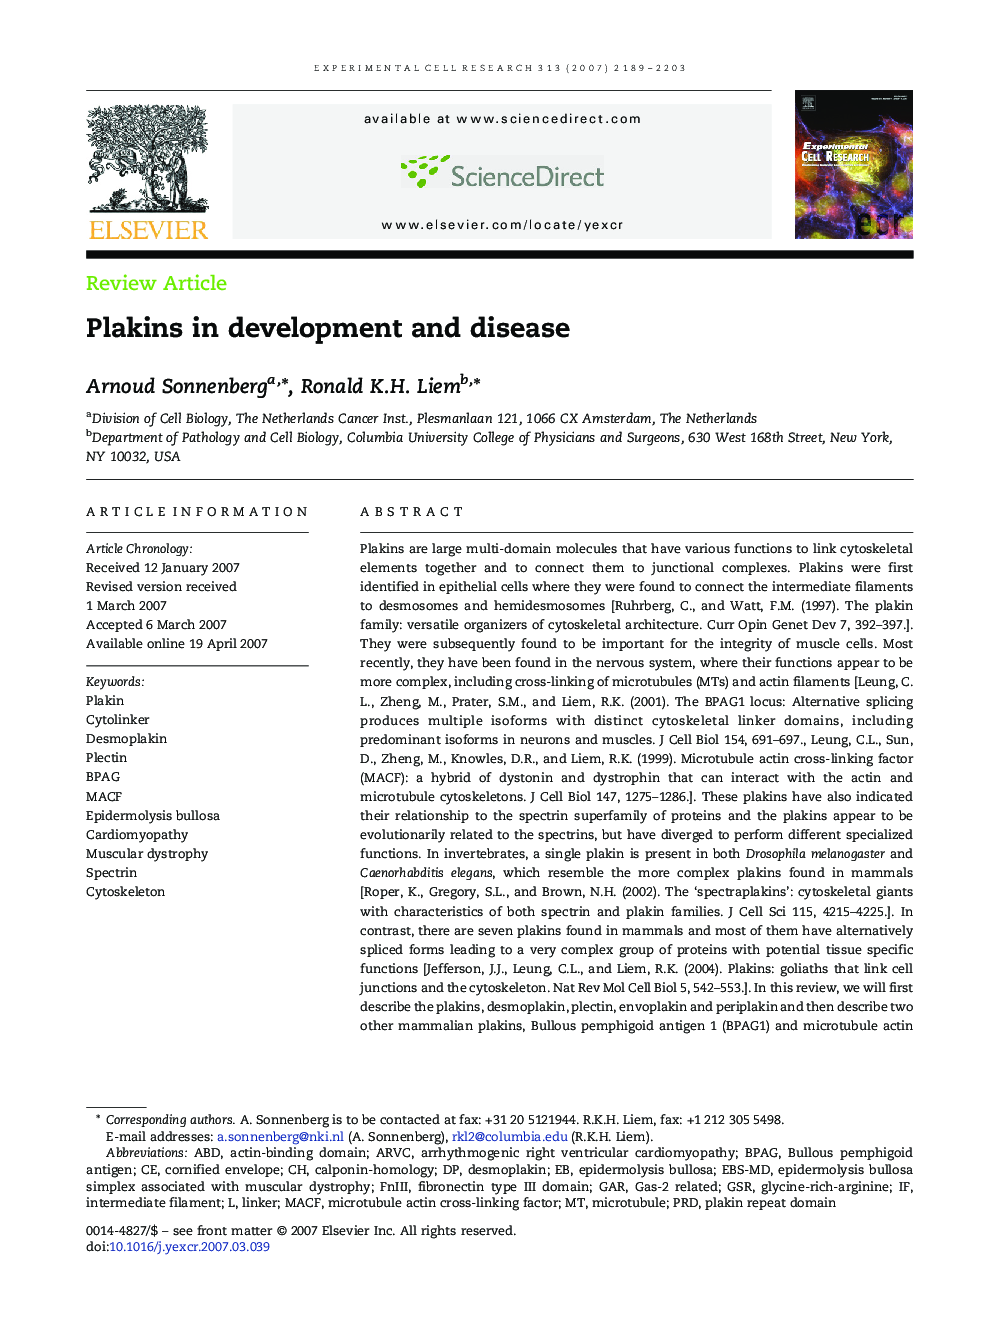 Plakins in development and disease